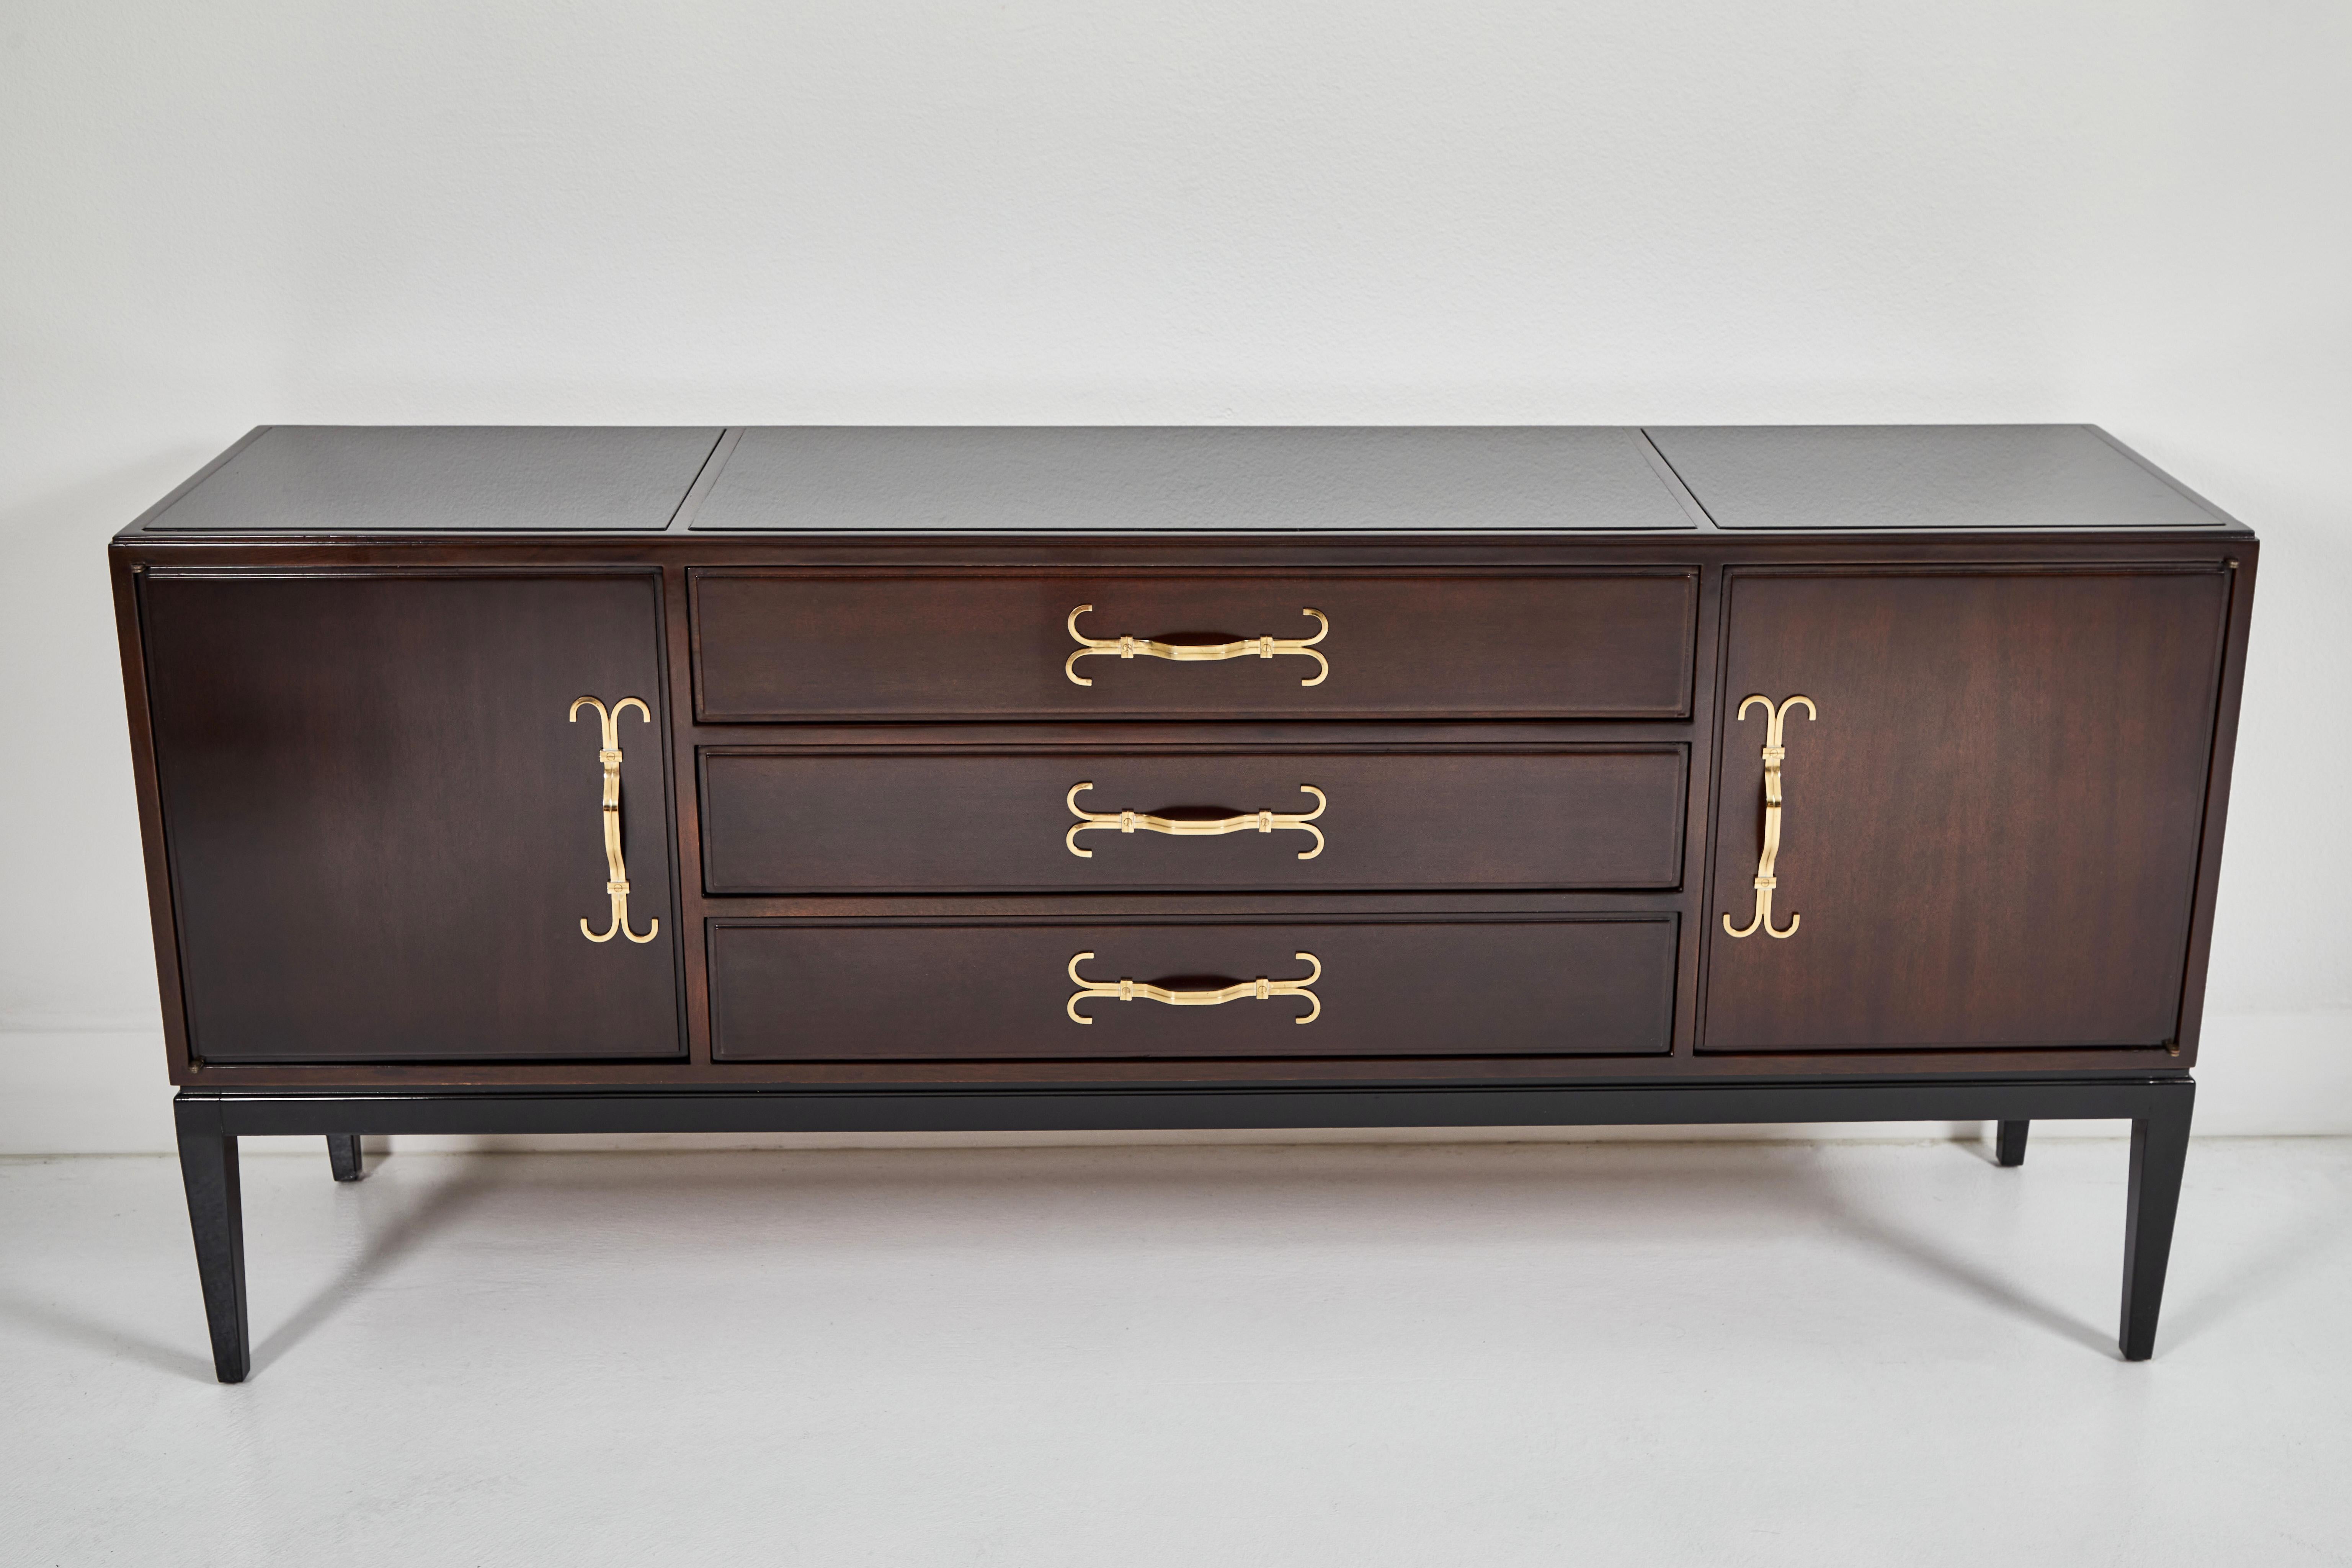 This 1960s original Tommi Parzinger server is in wonderful condition. The walnut is richly stained, yet allows the grain to be visible. The base and legs are black lacquered. The cabinet features two doors and 3 drawers, all with Parzinger’s